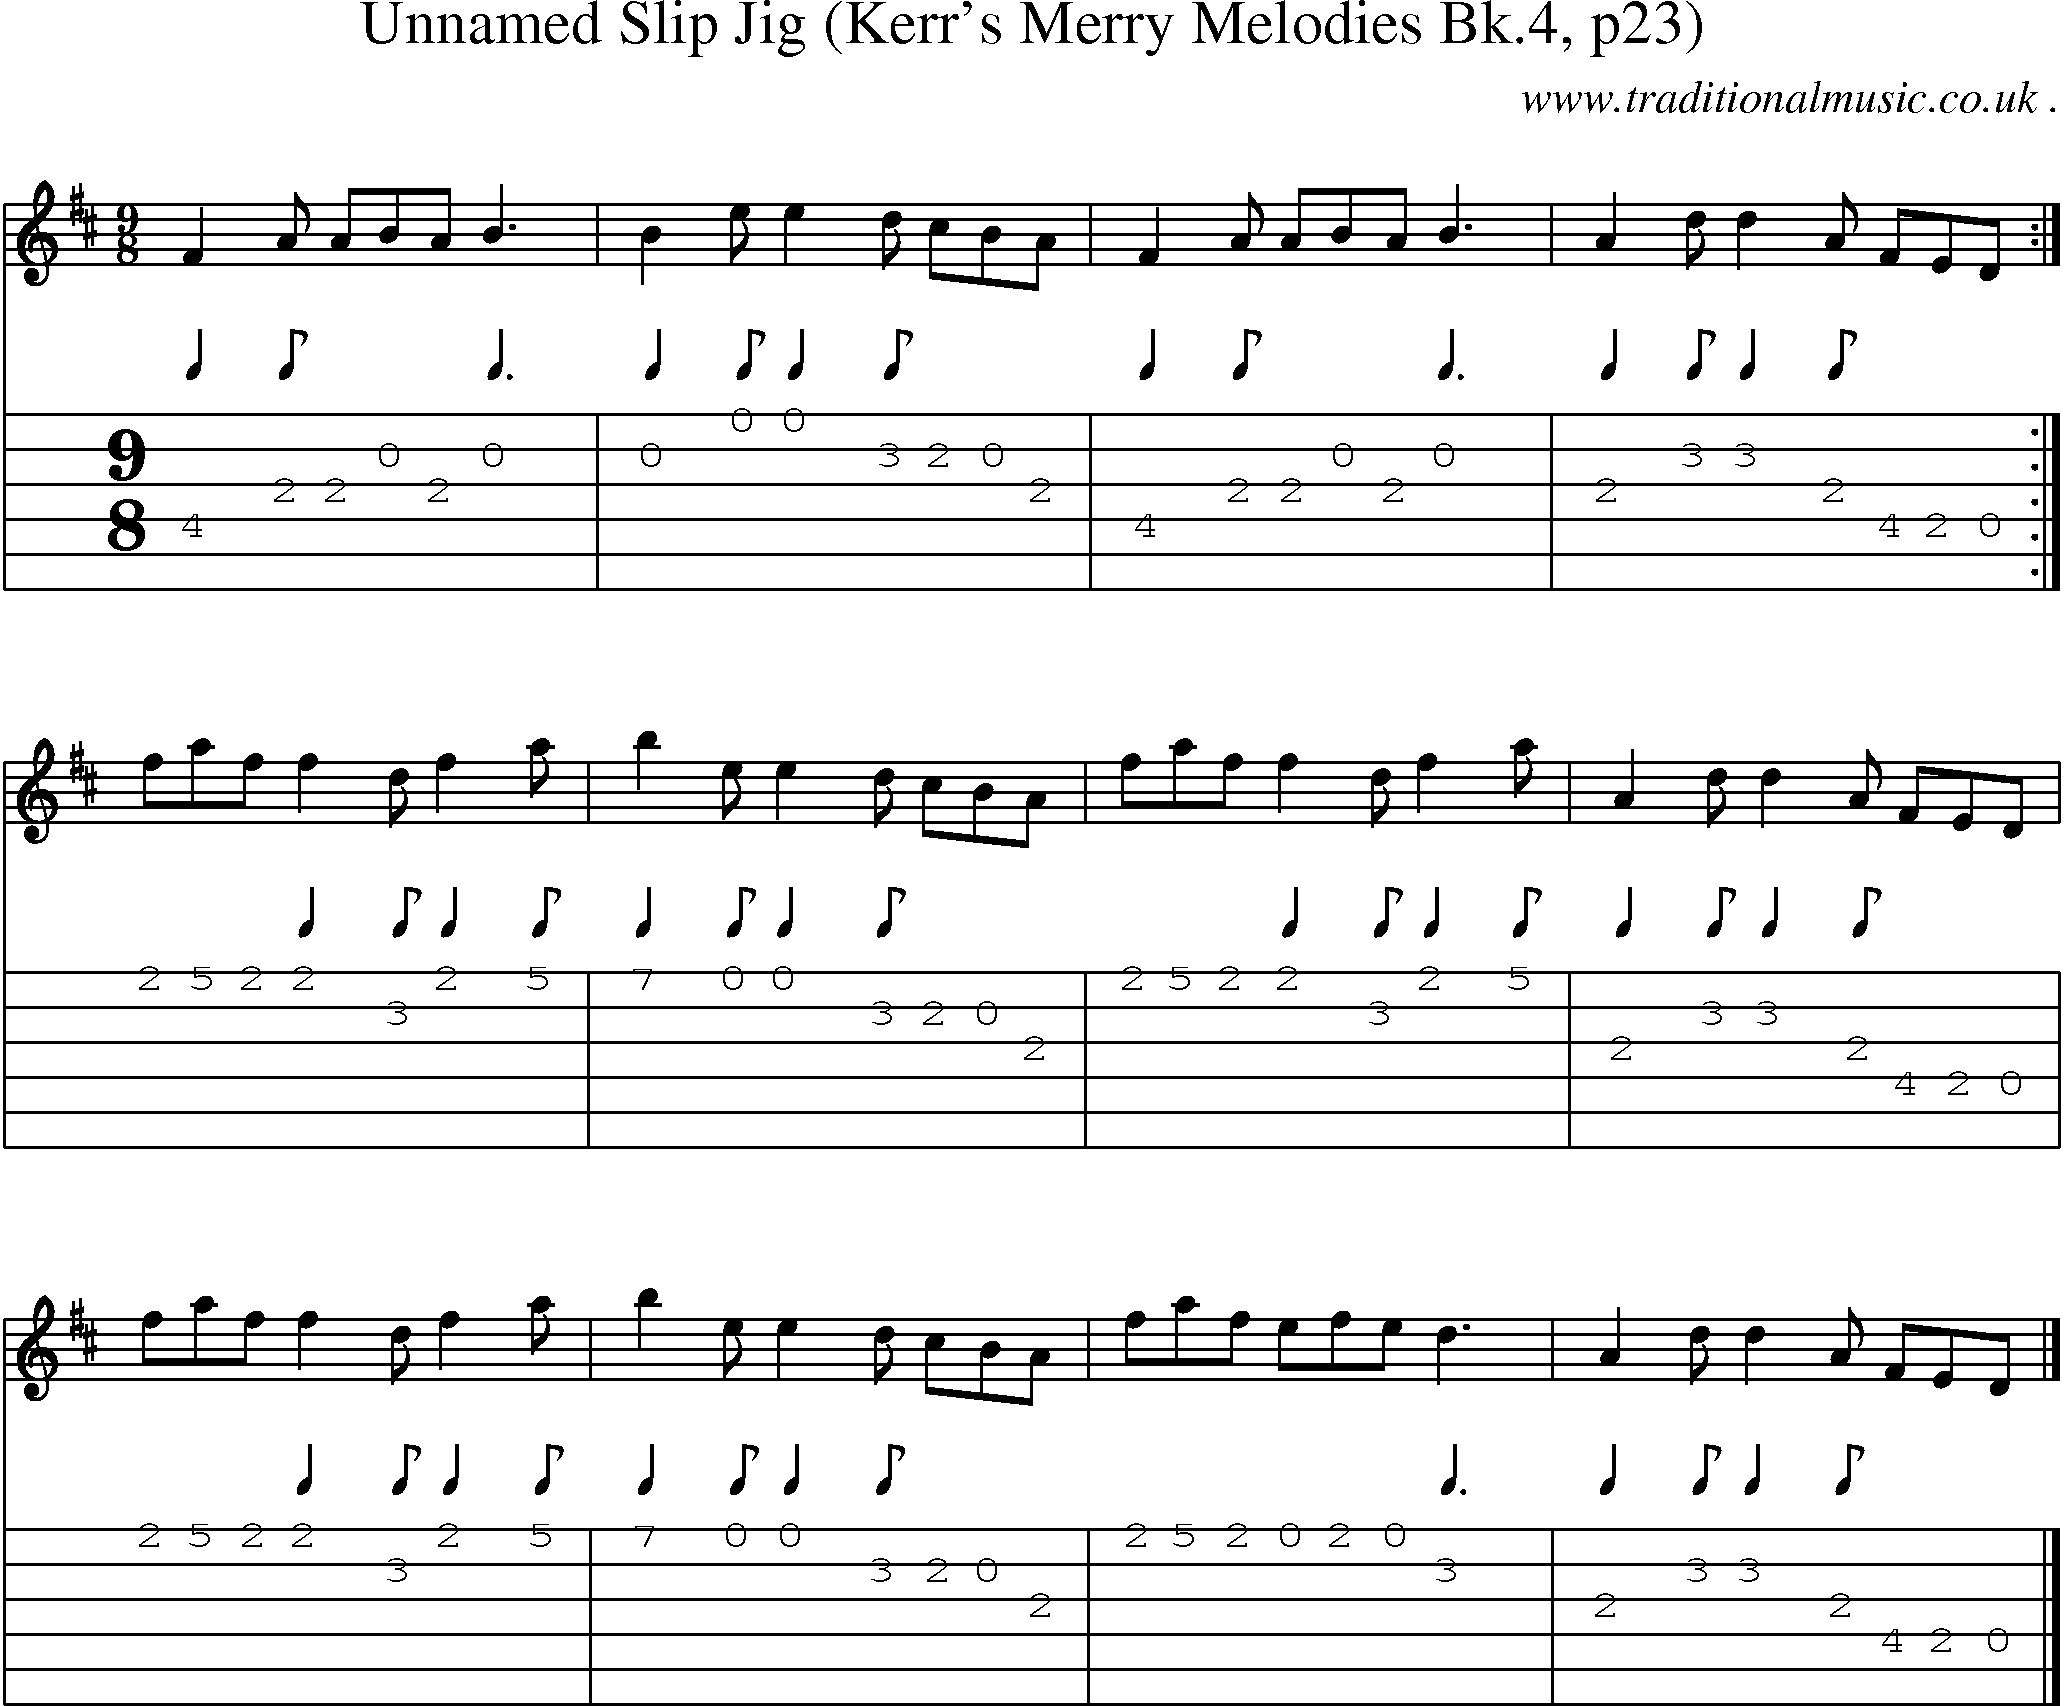 Sheet-music  score, Chords and Guitar Tabs for Unnamed Slip Jig Kerrs Merry Melodies Bk4 P23